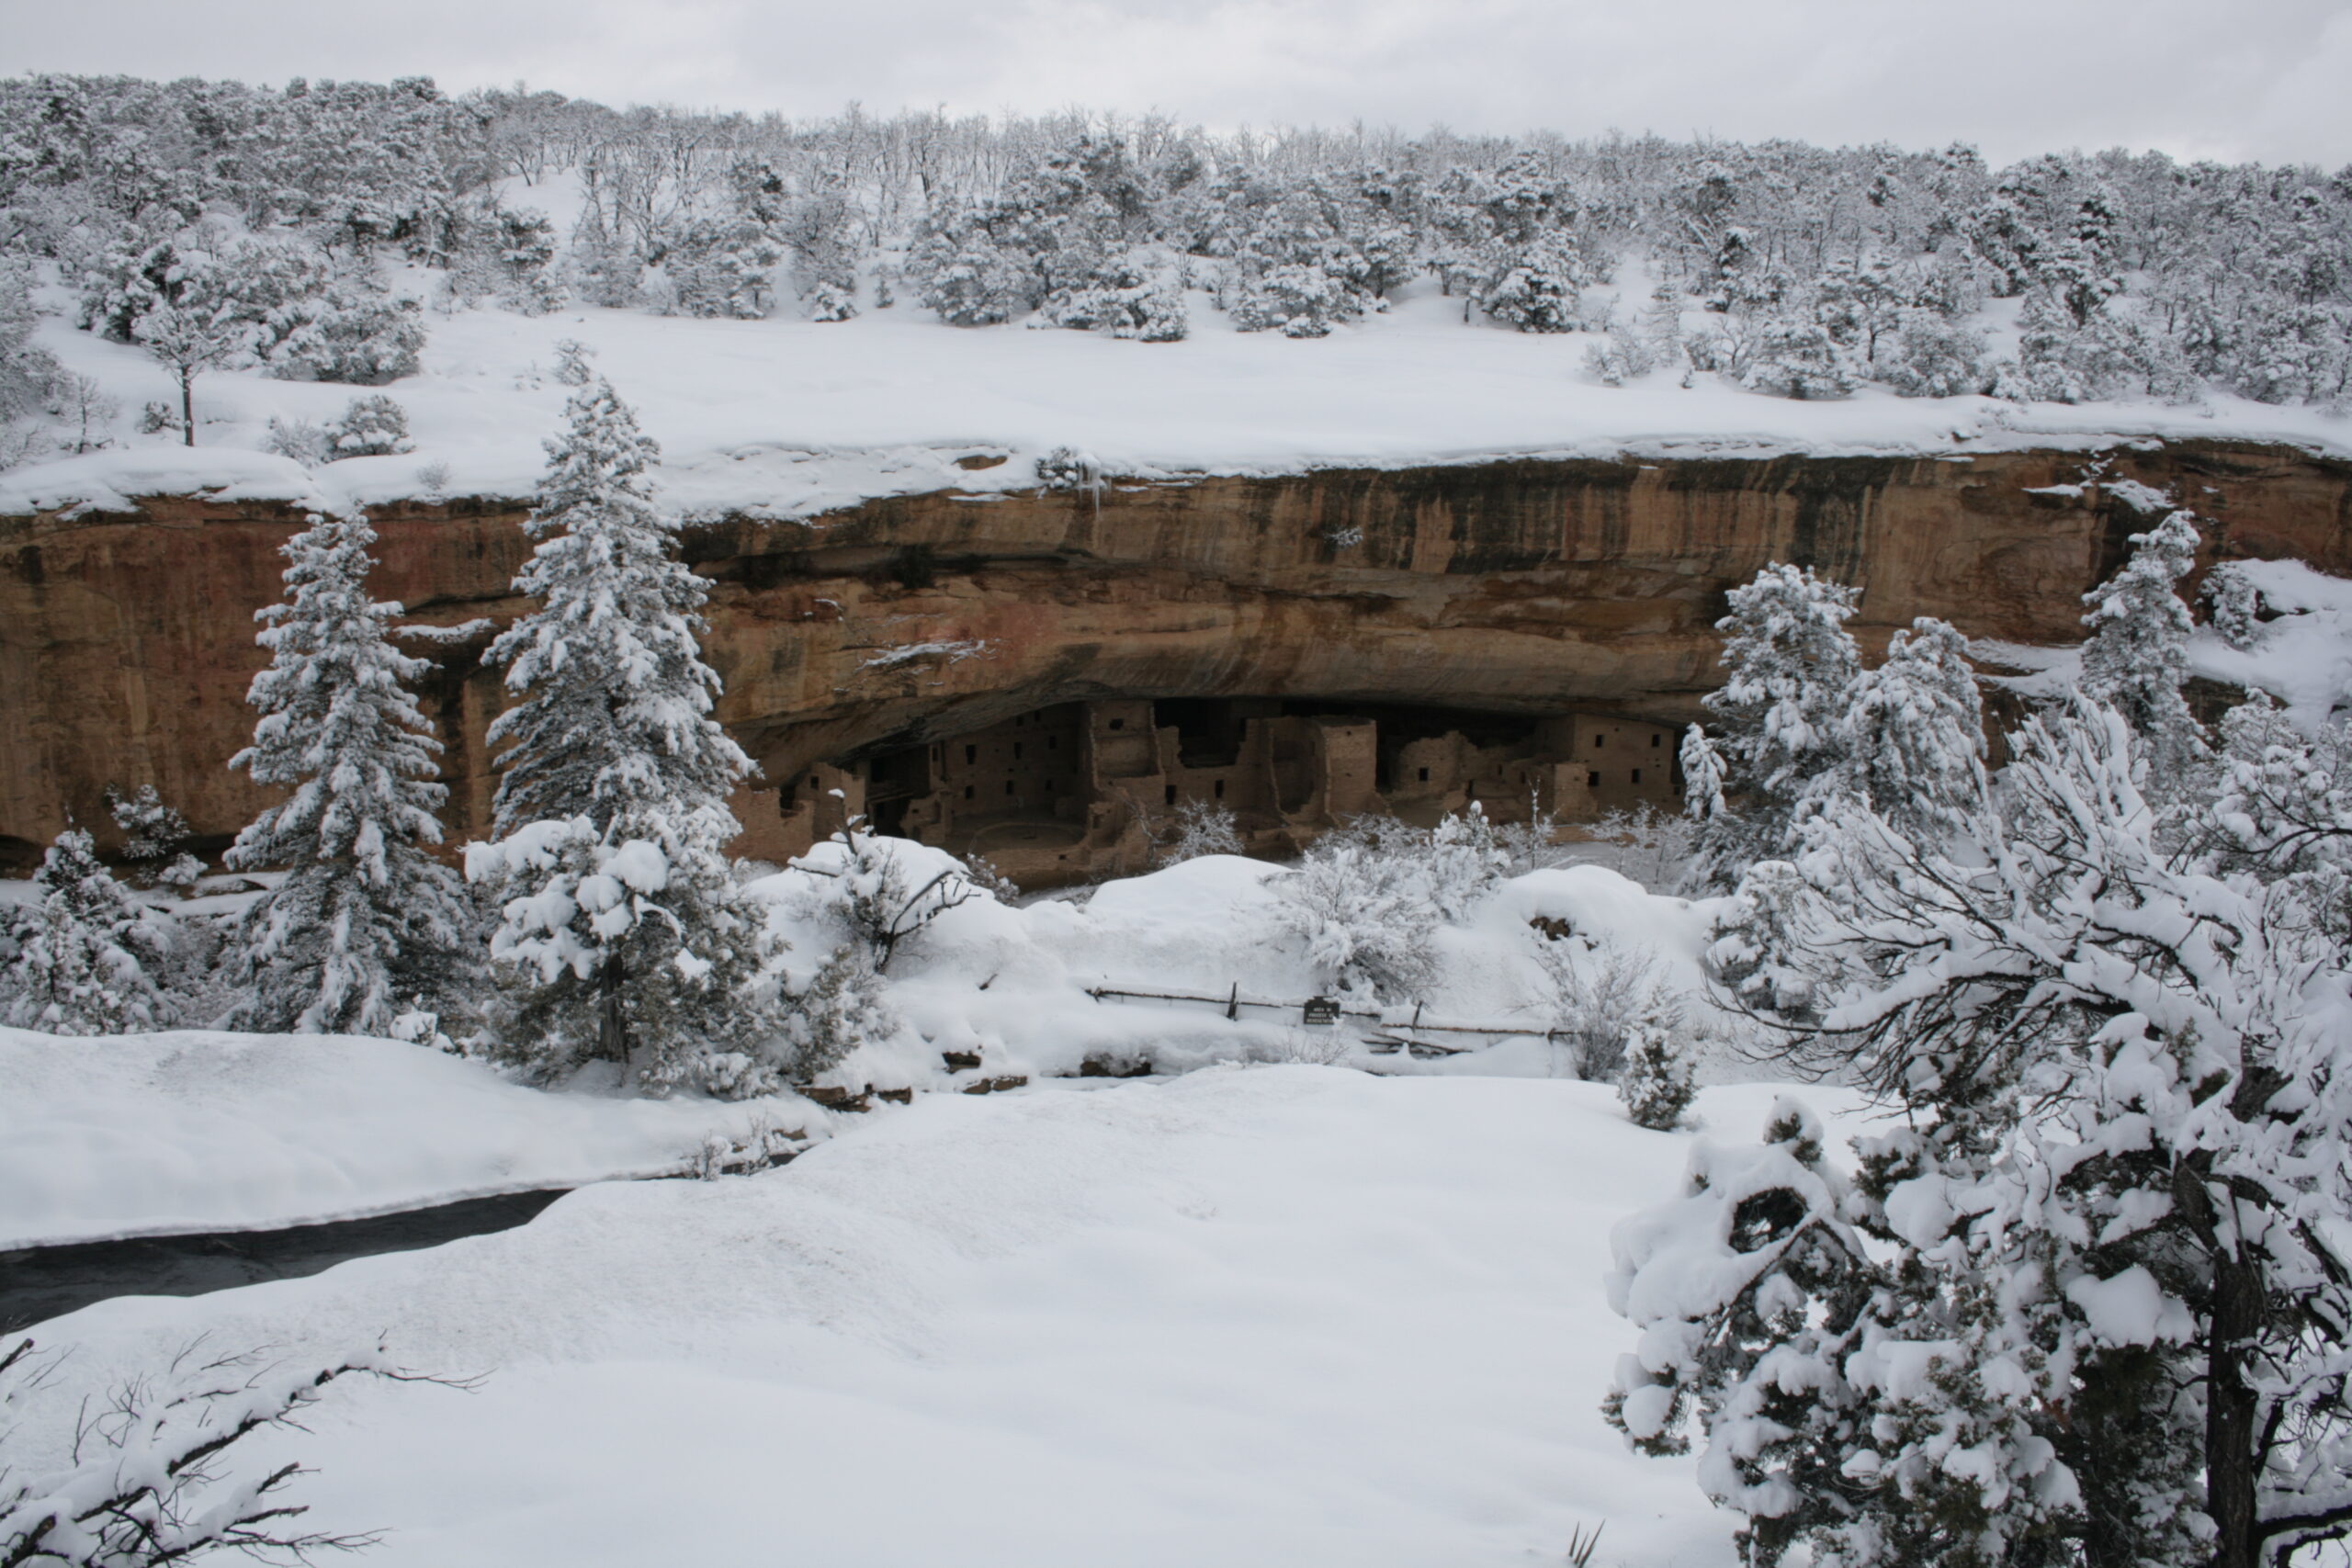 Spruce Tree House sits below a snow-covered cliff in Mesa Verde National Park.